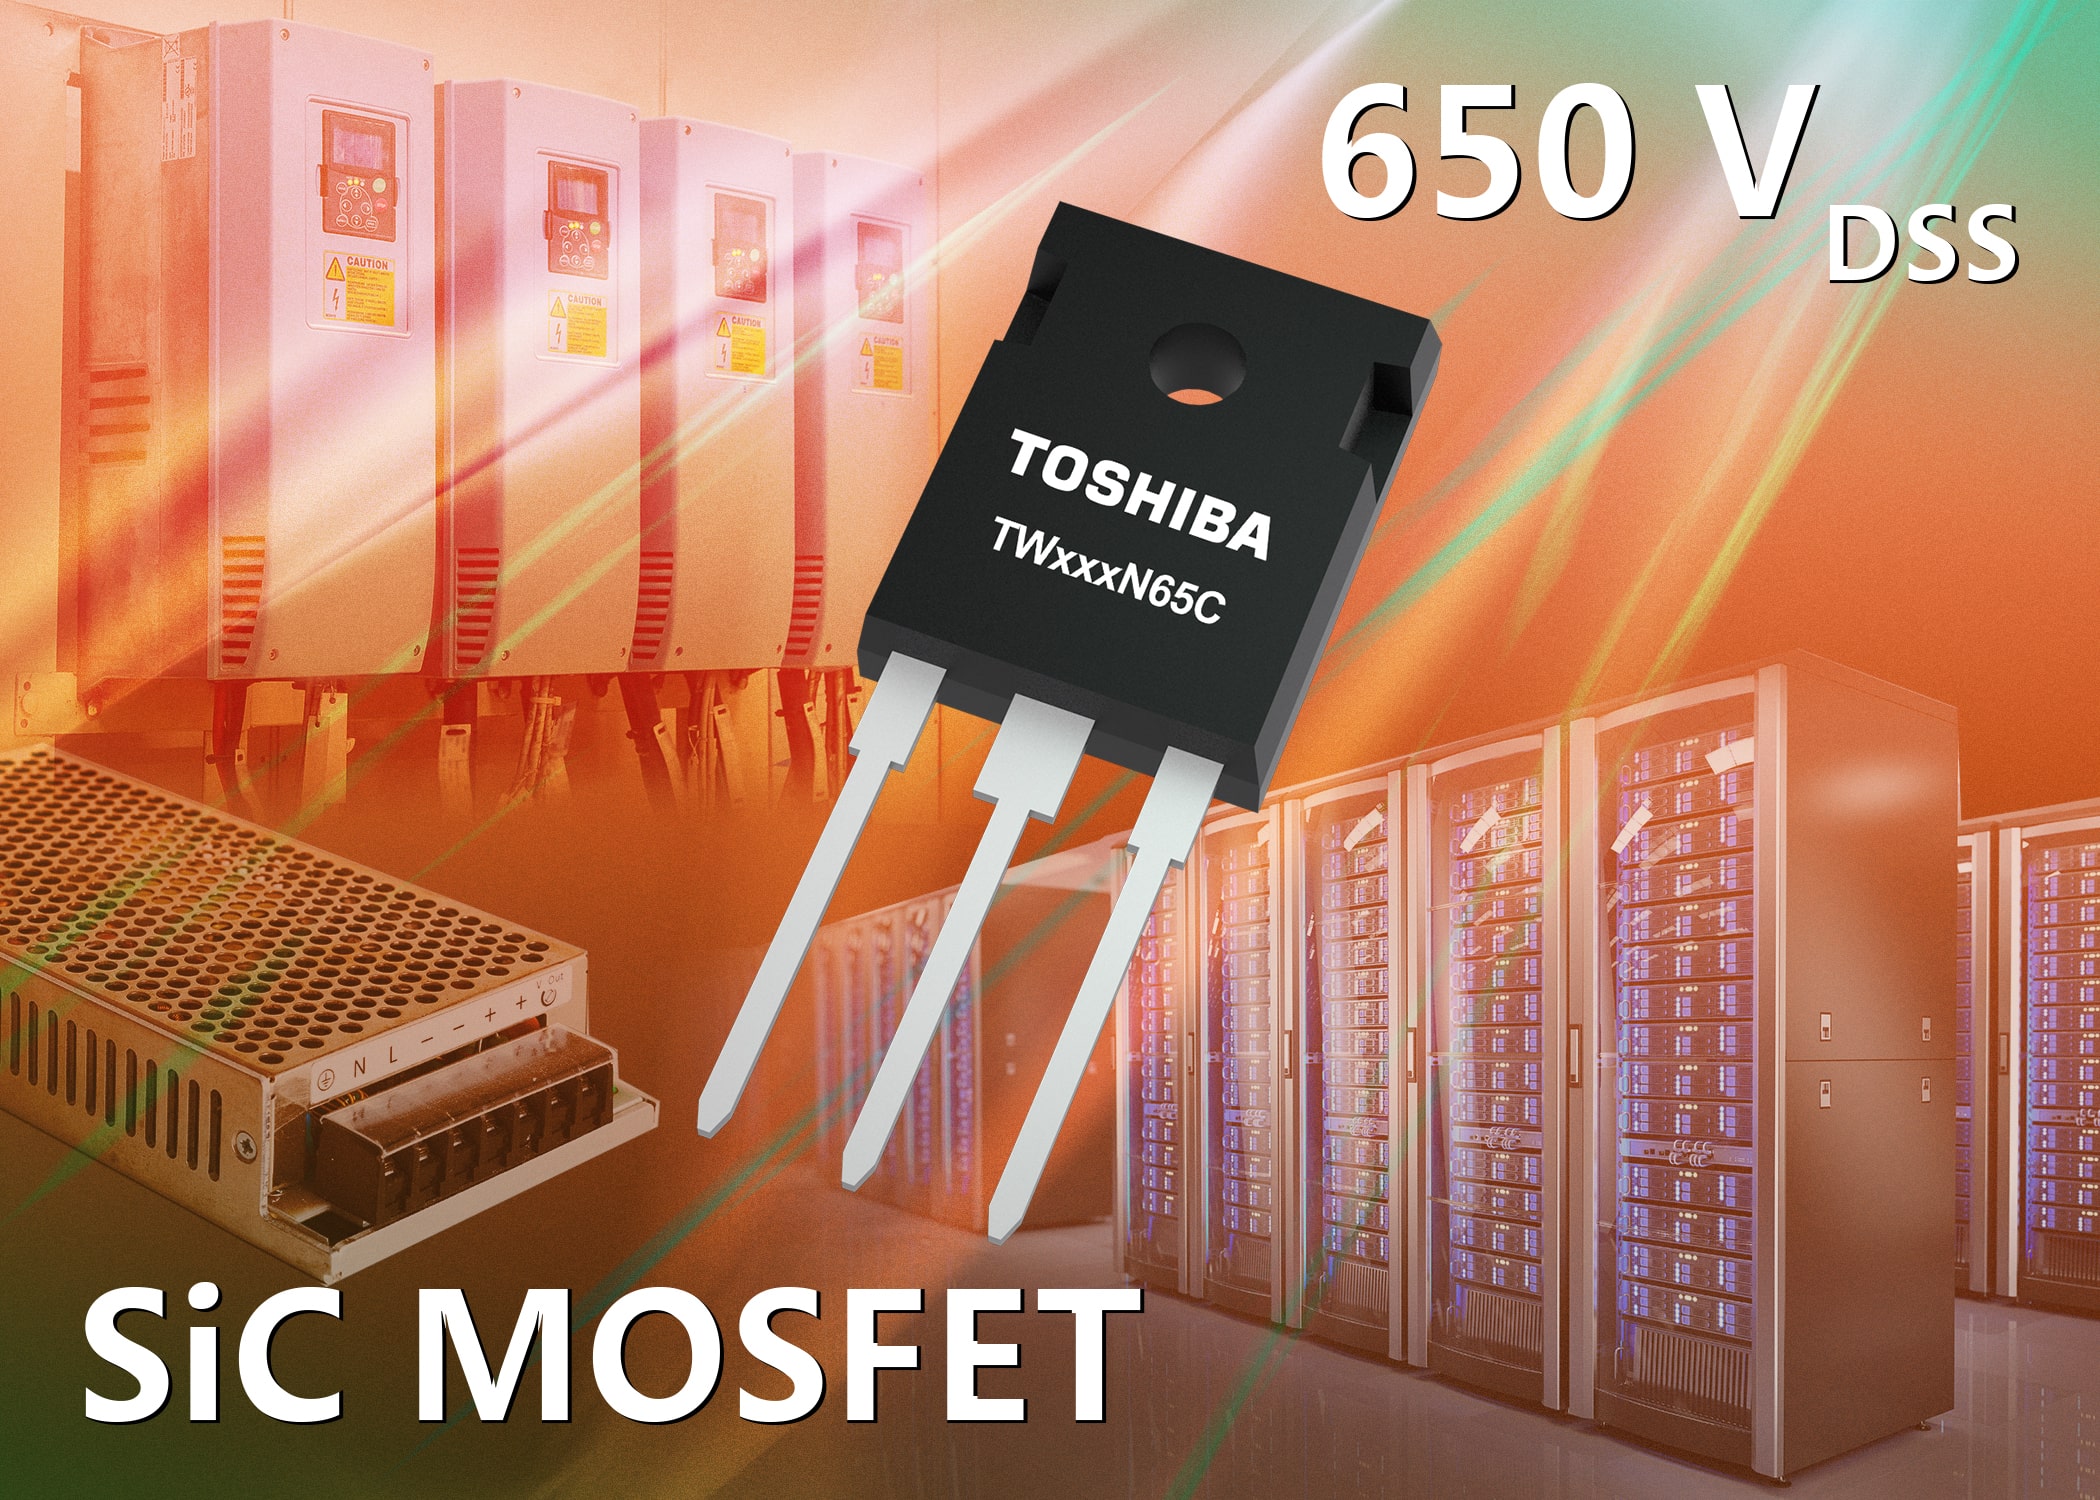 Toshiba launches third generation 650V silicon carbide (SiC) MOSFETs